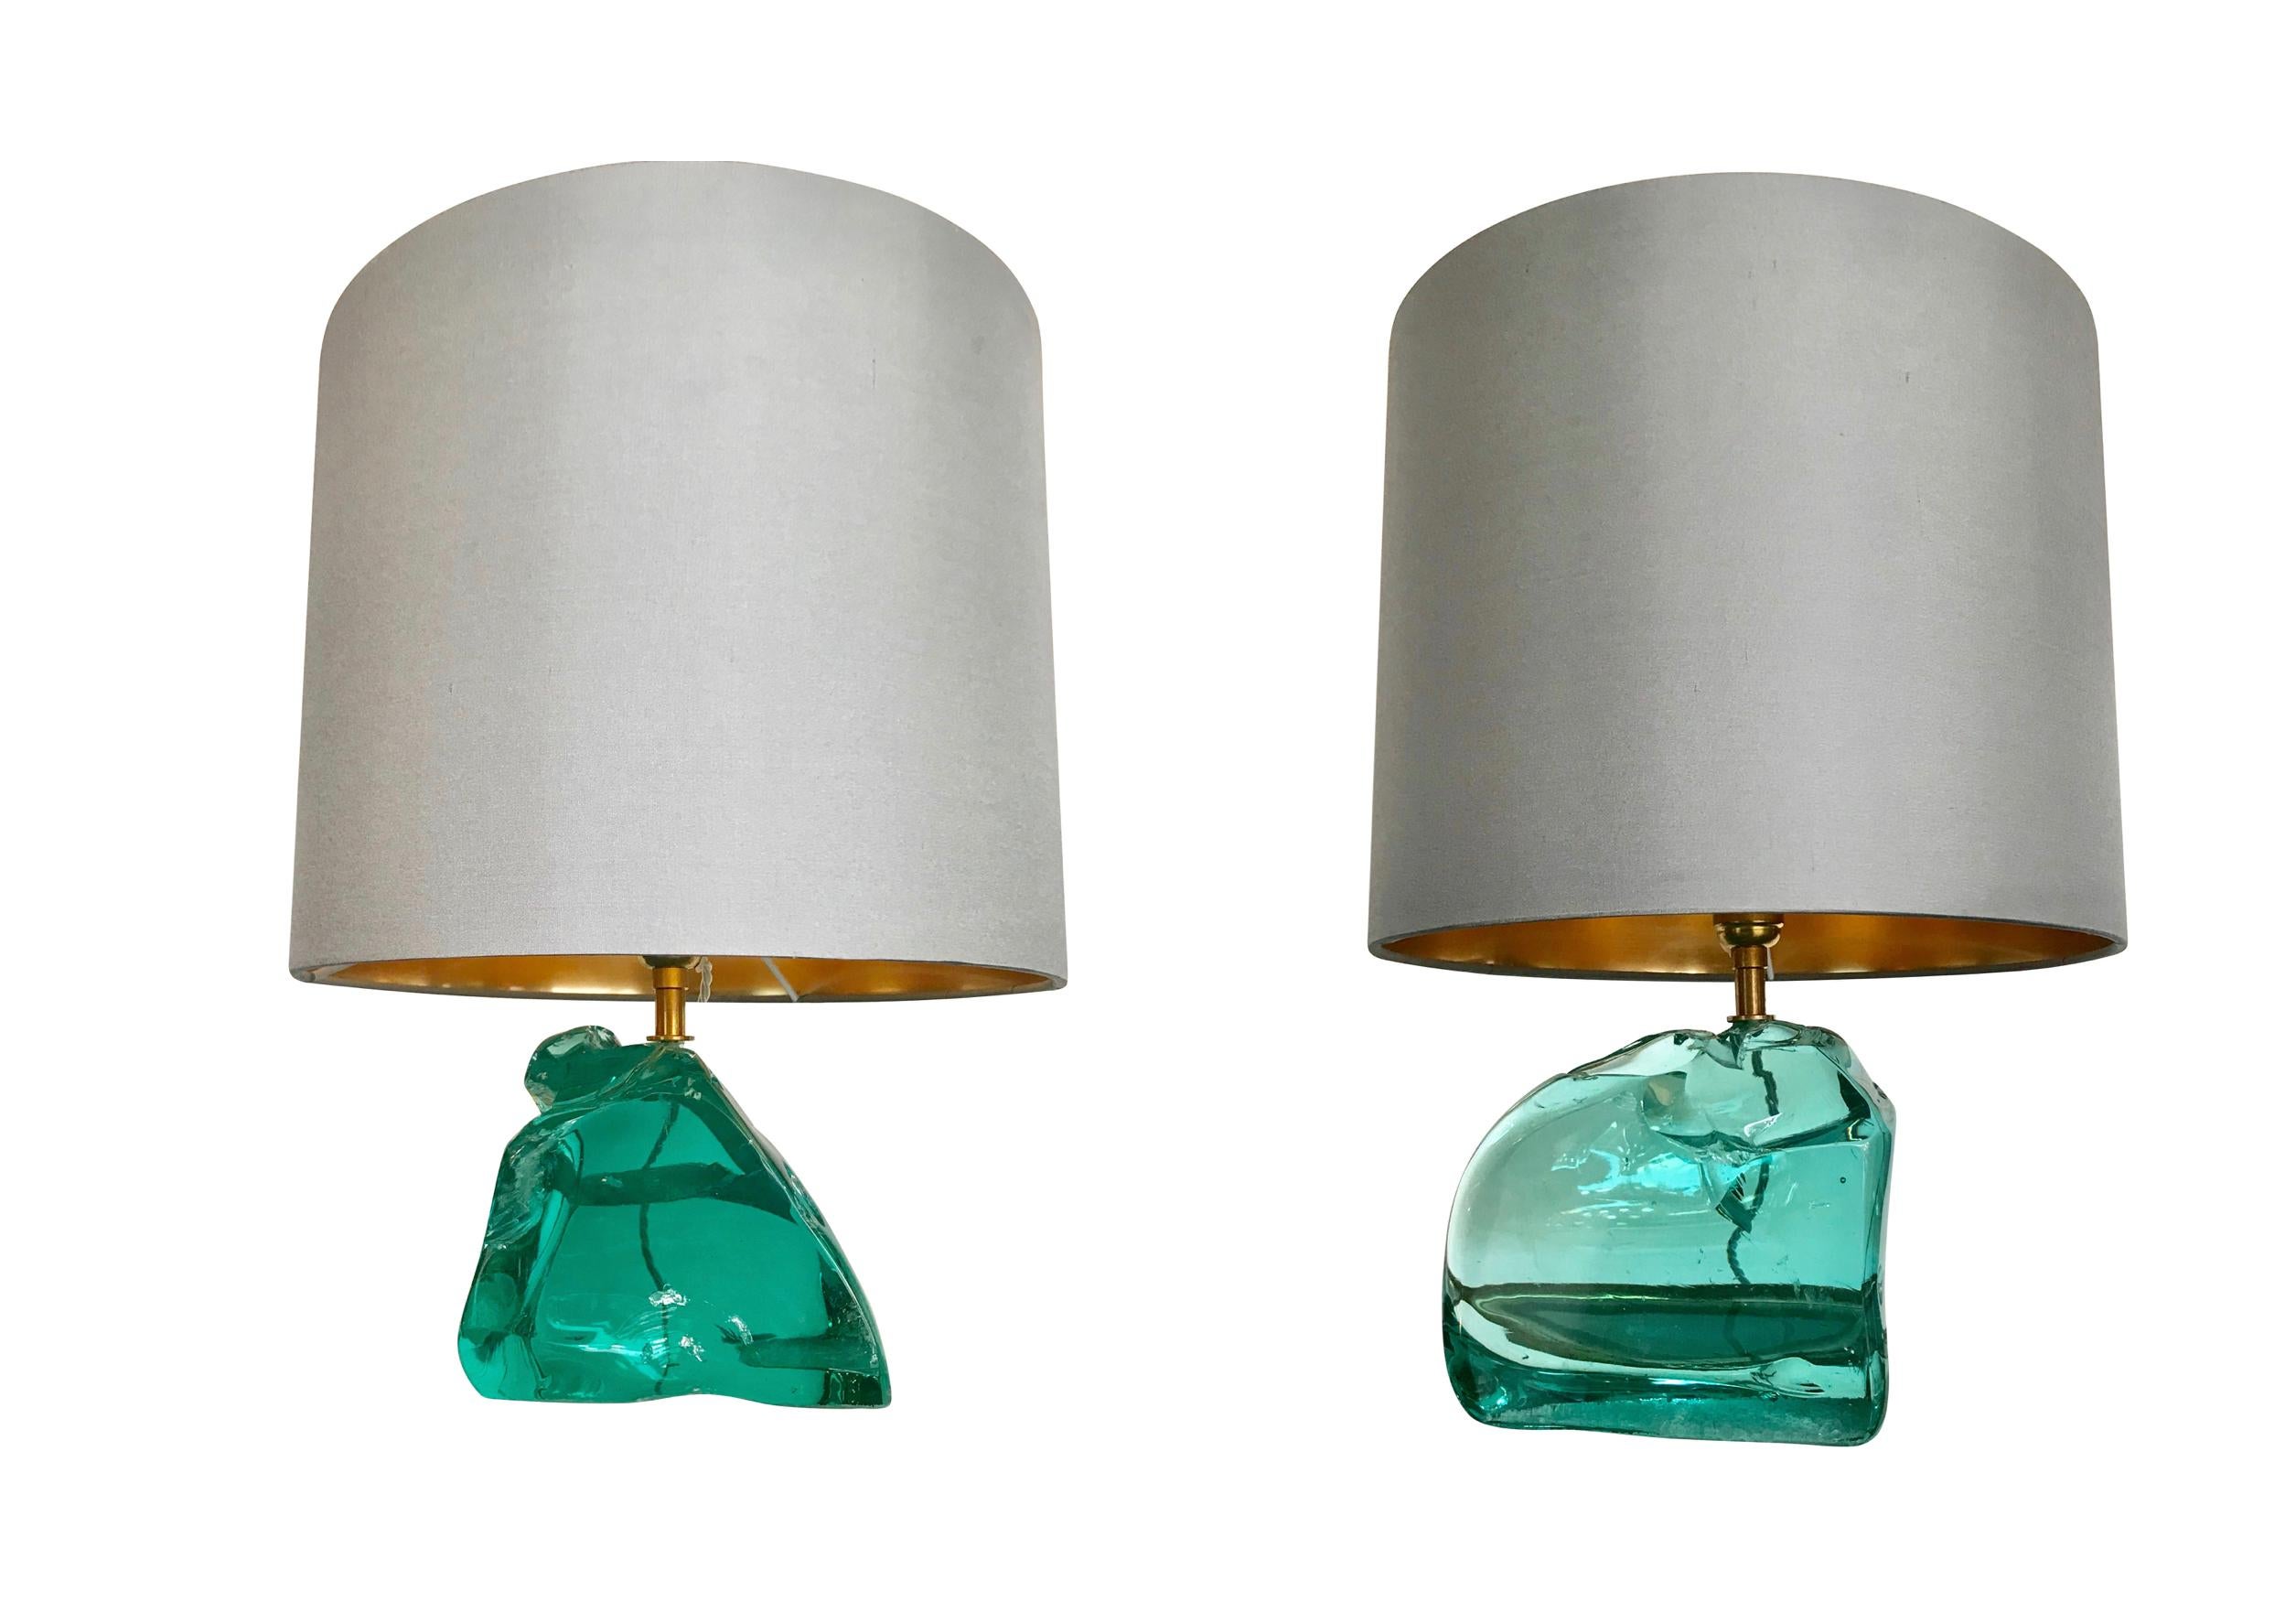 A pair of polished rock glass lamps with brass fittings in the style of Max Ingrand for Saint Gobain. Each base is made from a polished pieces of solid green glass which naturally has chips and contours like any natural material. With new bespoke